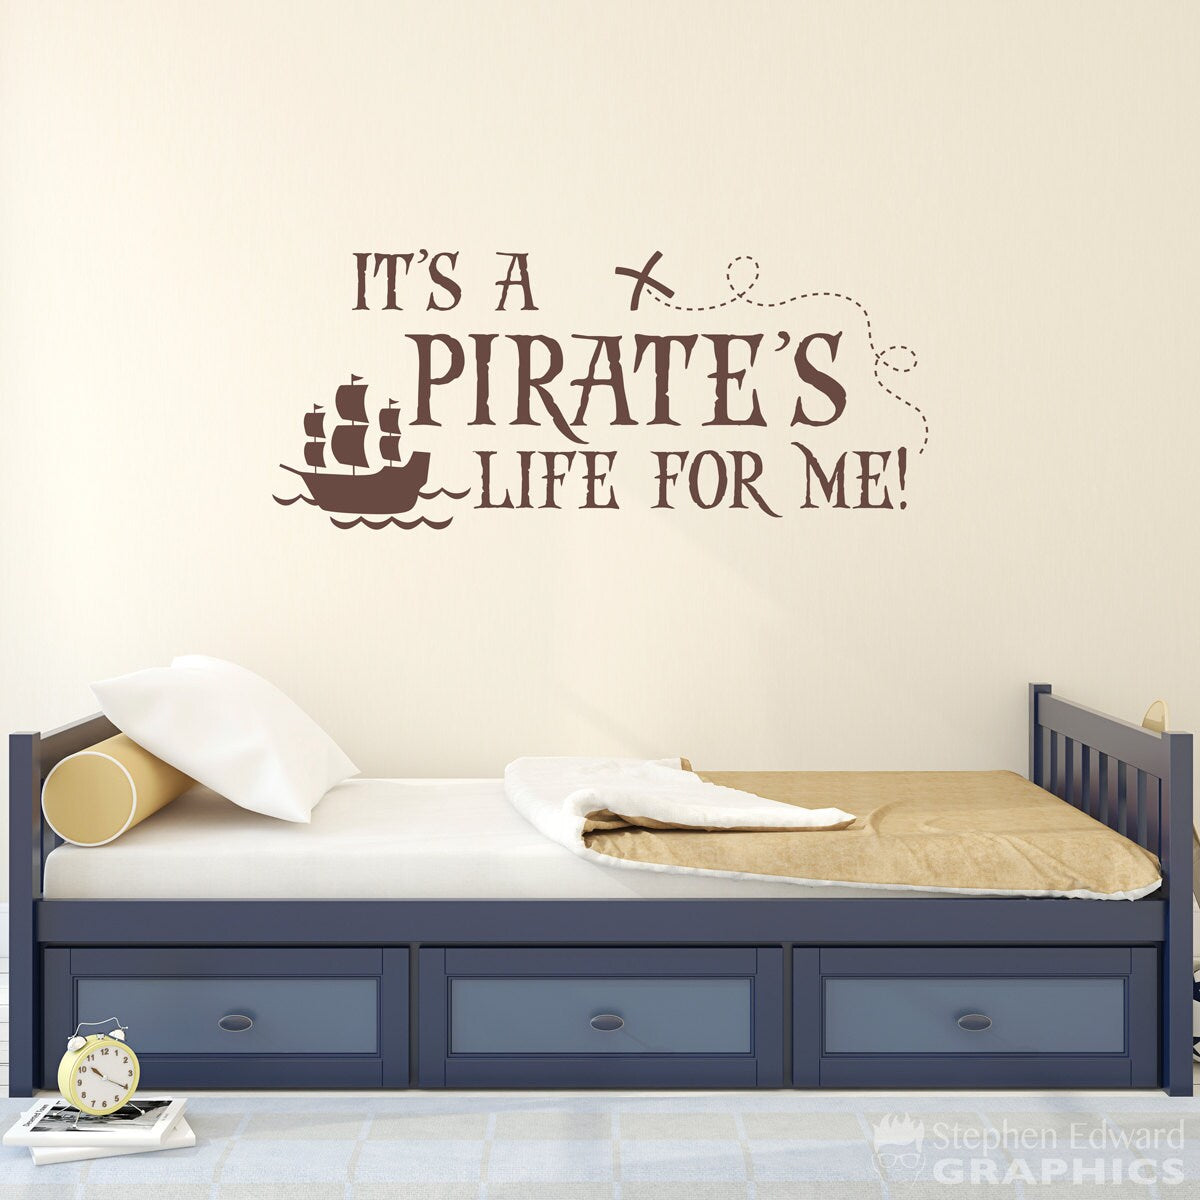 Pirate Decal - It's a Pirate's Life for Me Quote - Pirate Wall Decal for Boys Bedroom - X marks the spot